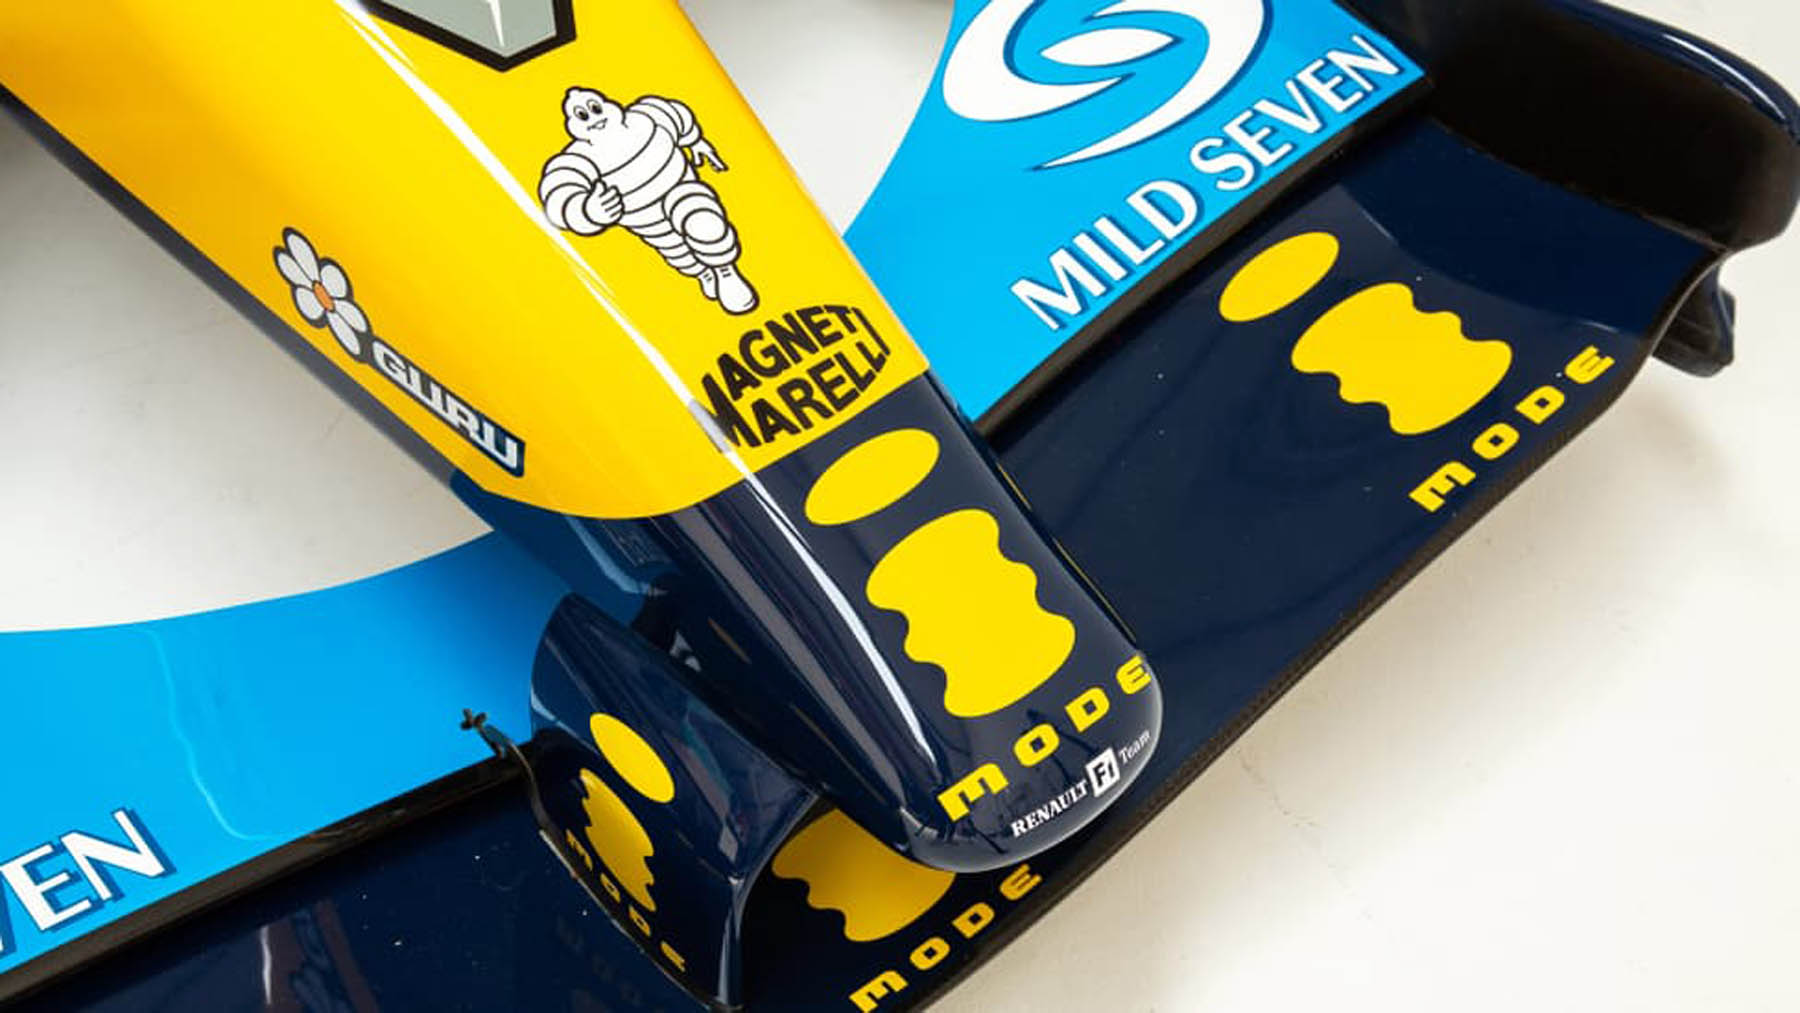 2004 Renault R24 Alonso 9